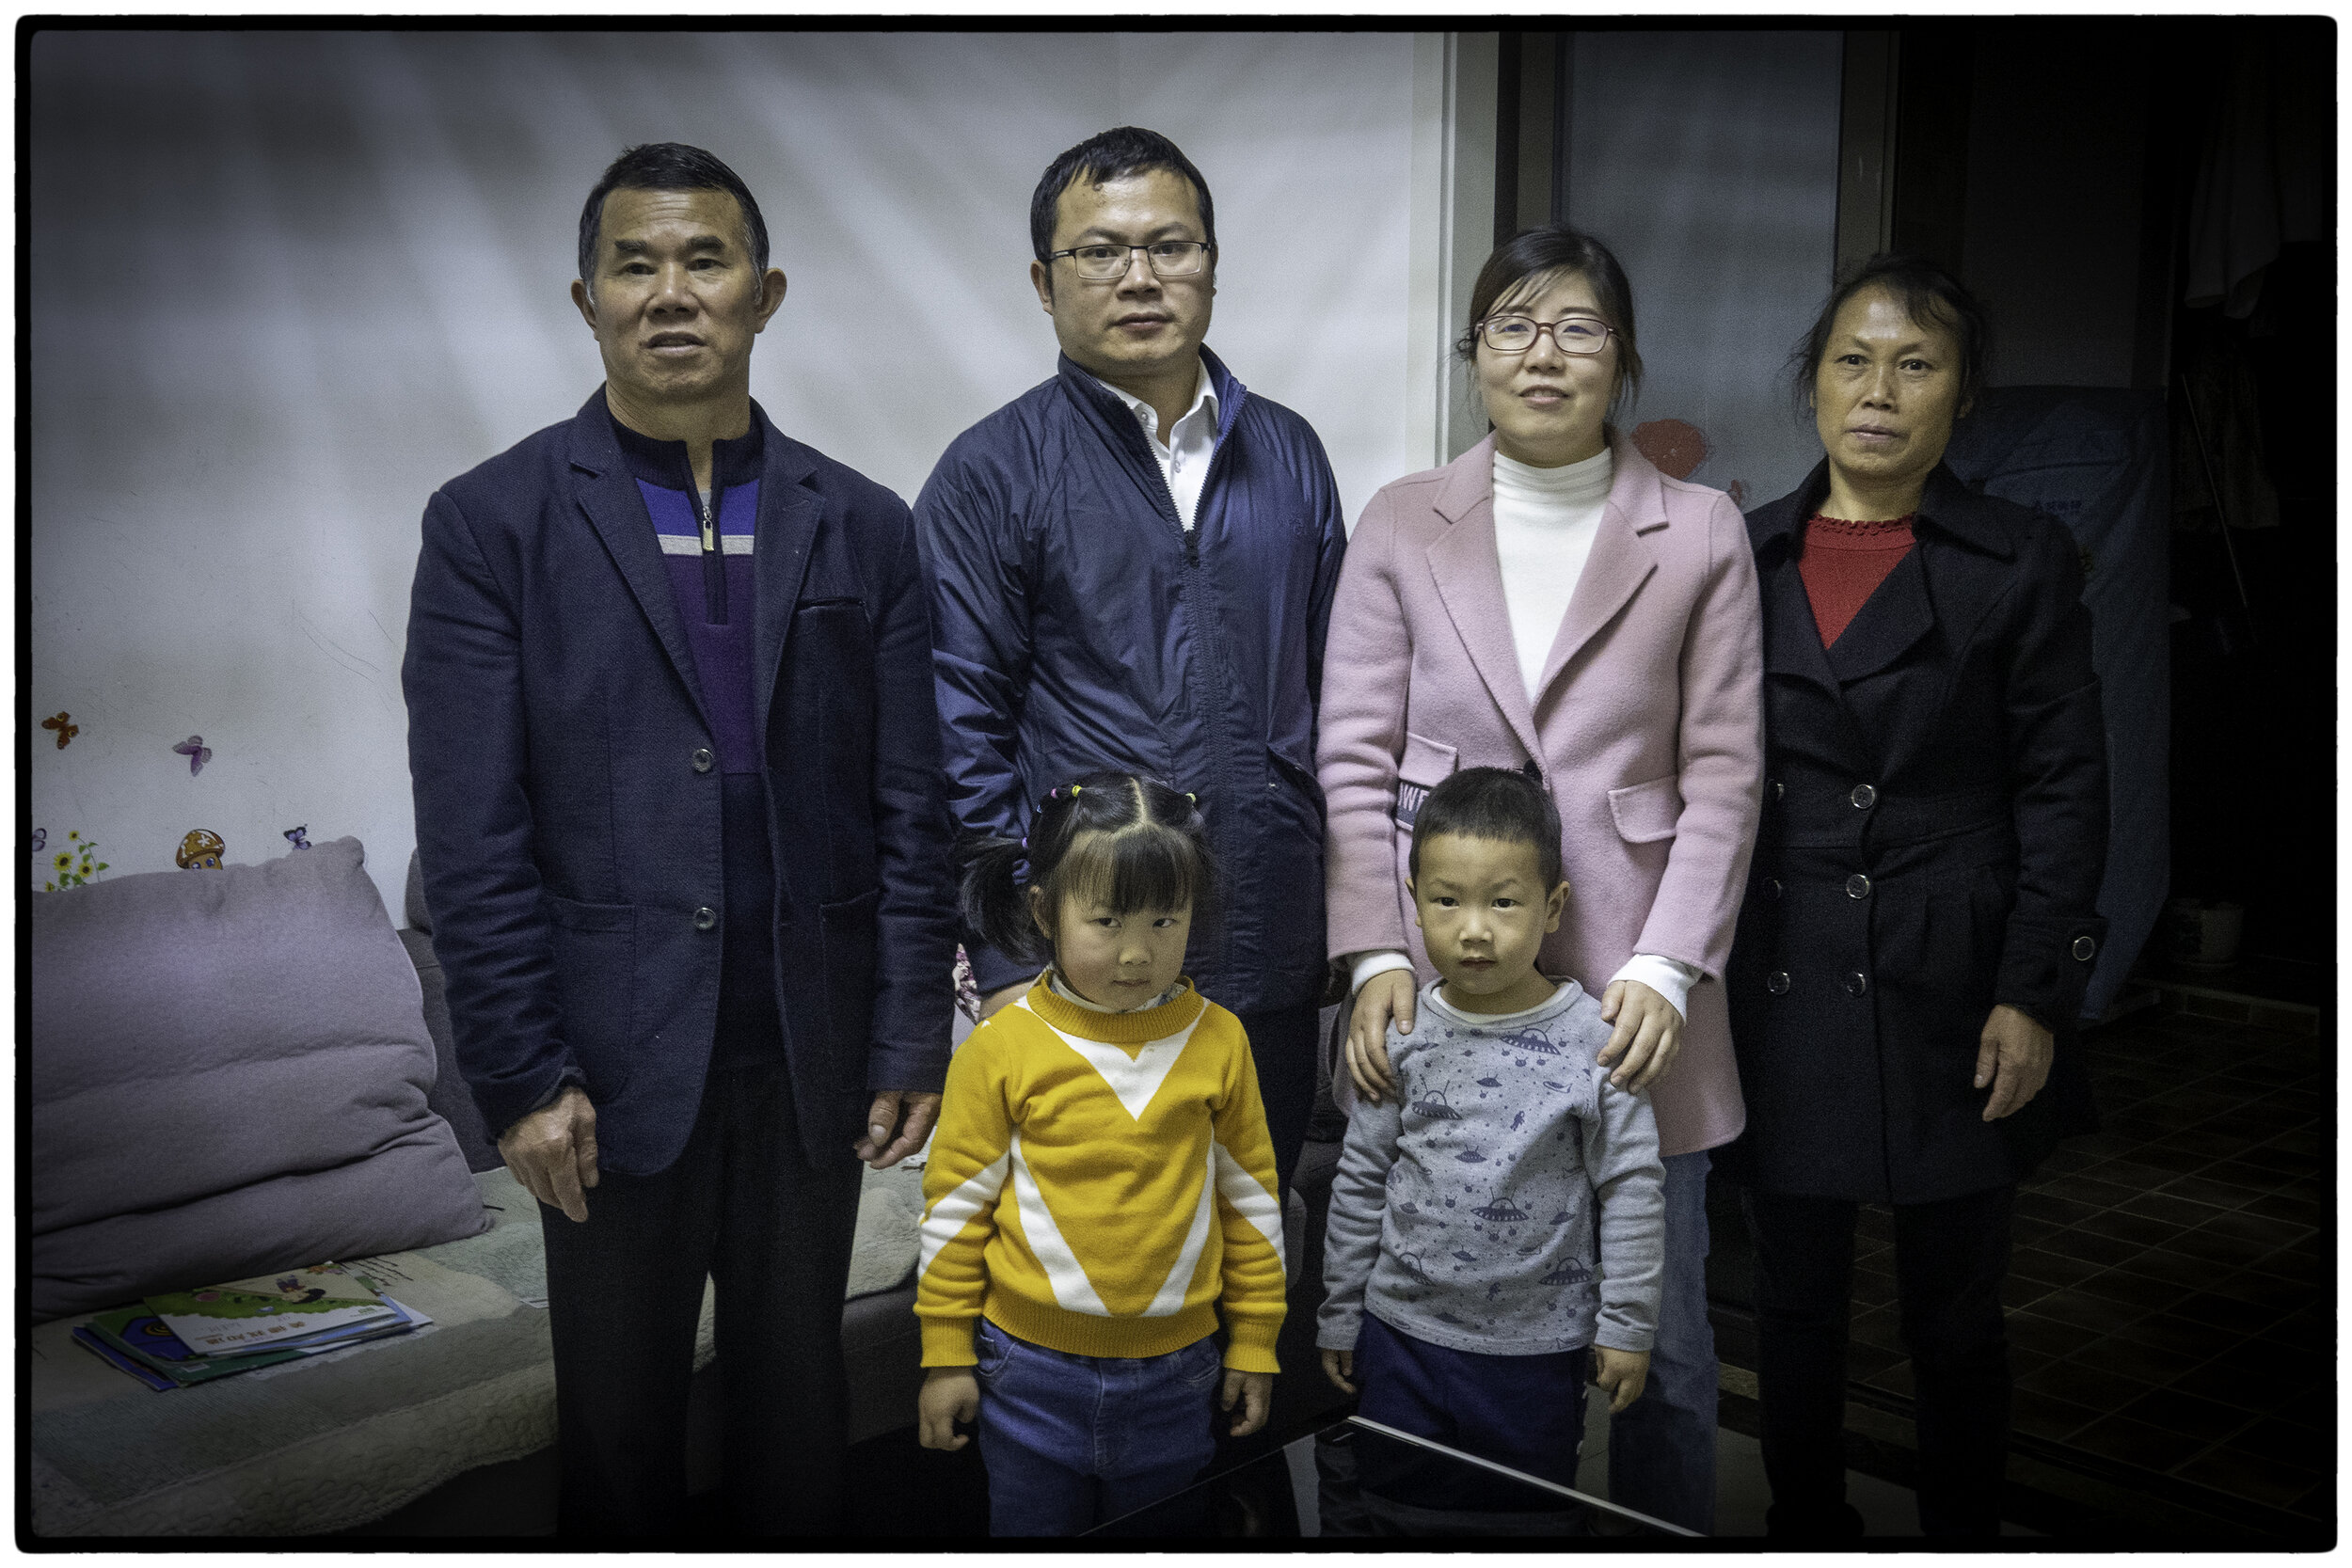 Zhong's family and his parents